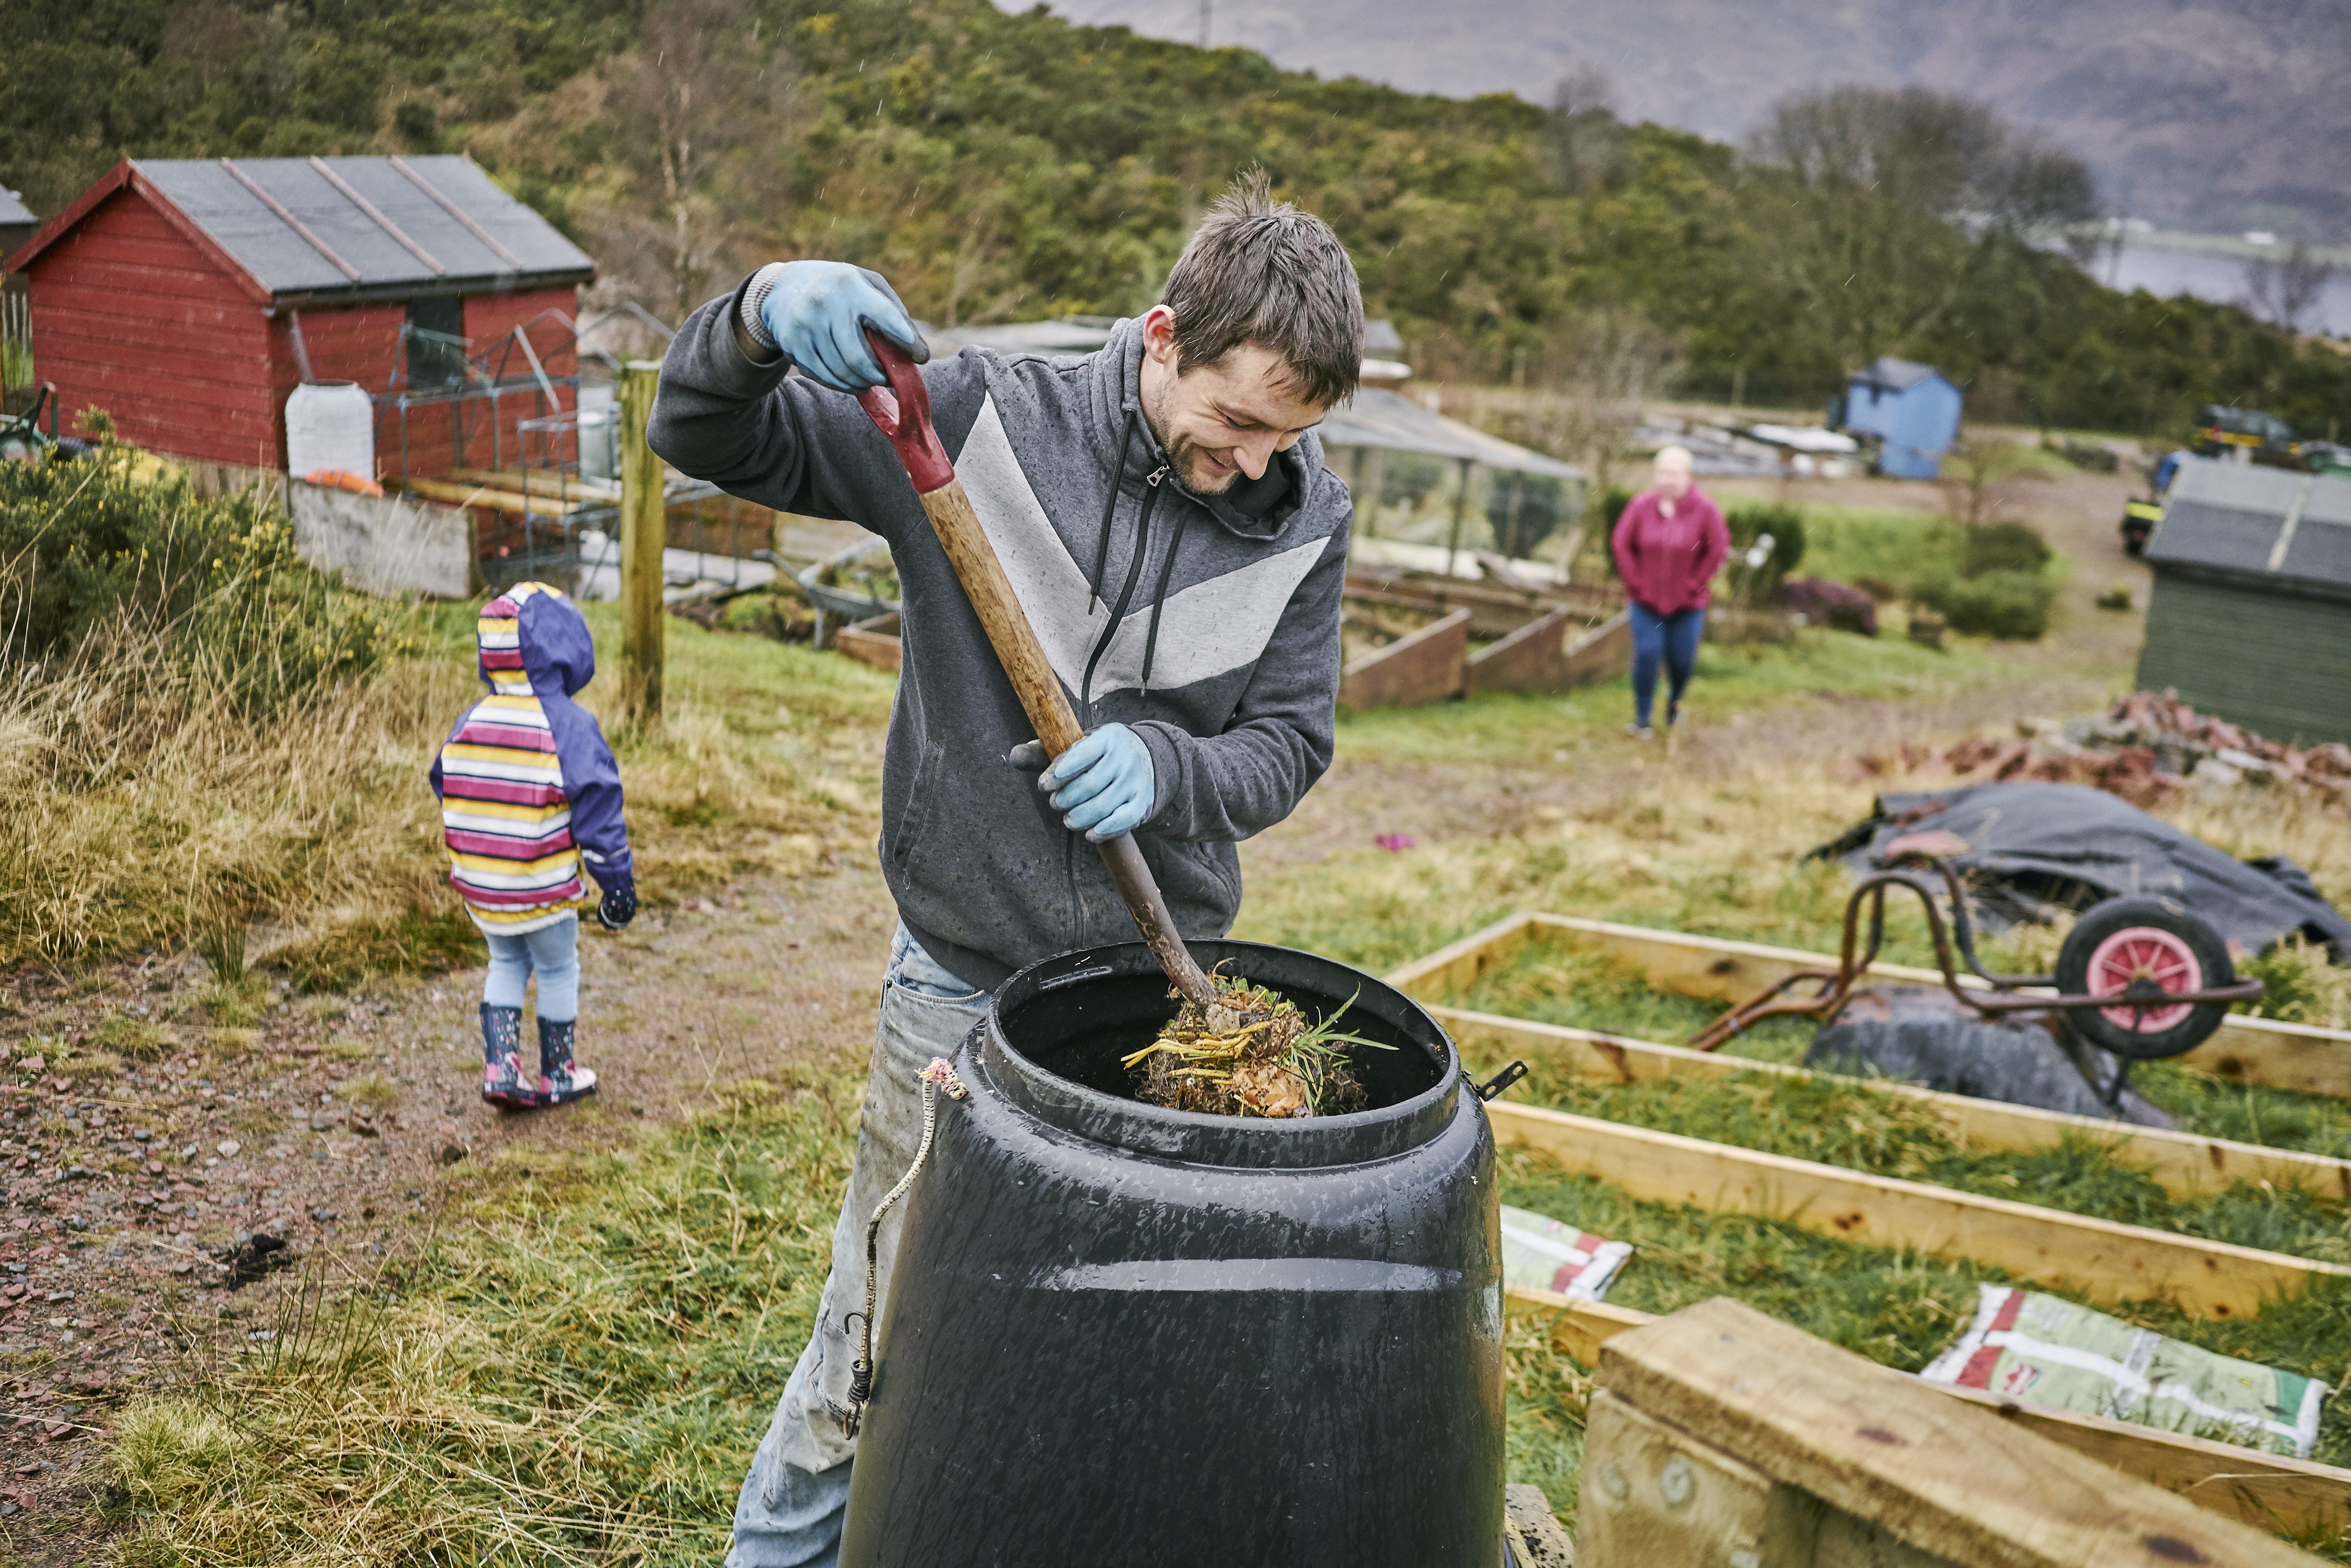 Man uses pitch fork to turn compost in plastic compost bin, with terraced raised beds and sheds of other plots behind him, as well as child and woman.